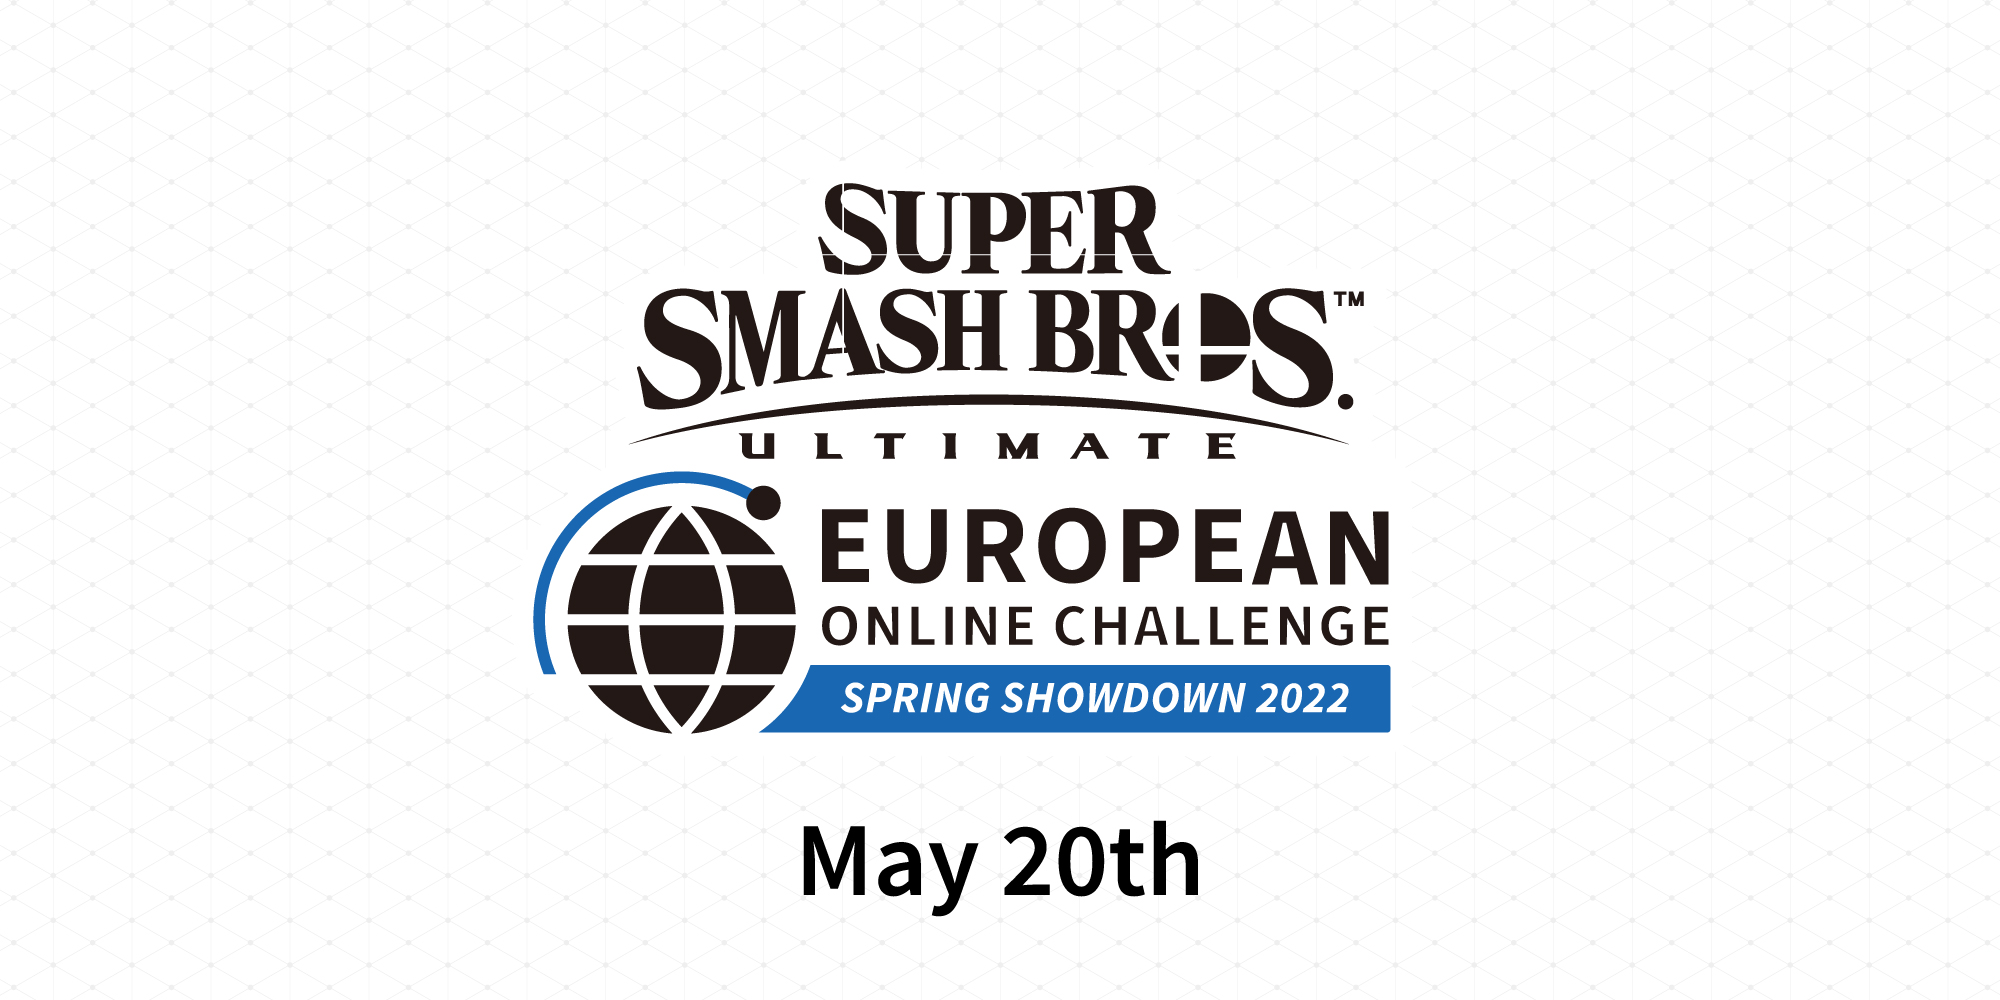 The results are in for the latest Super Smash Bros. Ultimate European Online Challenge!